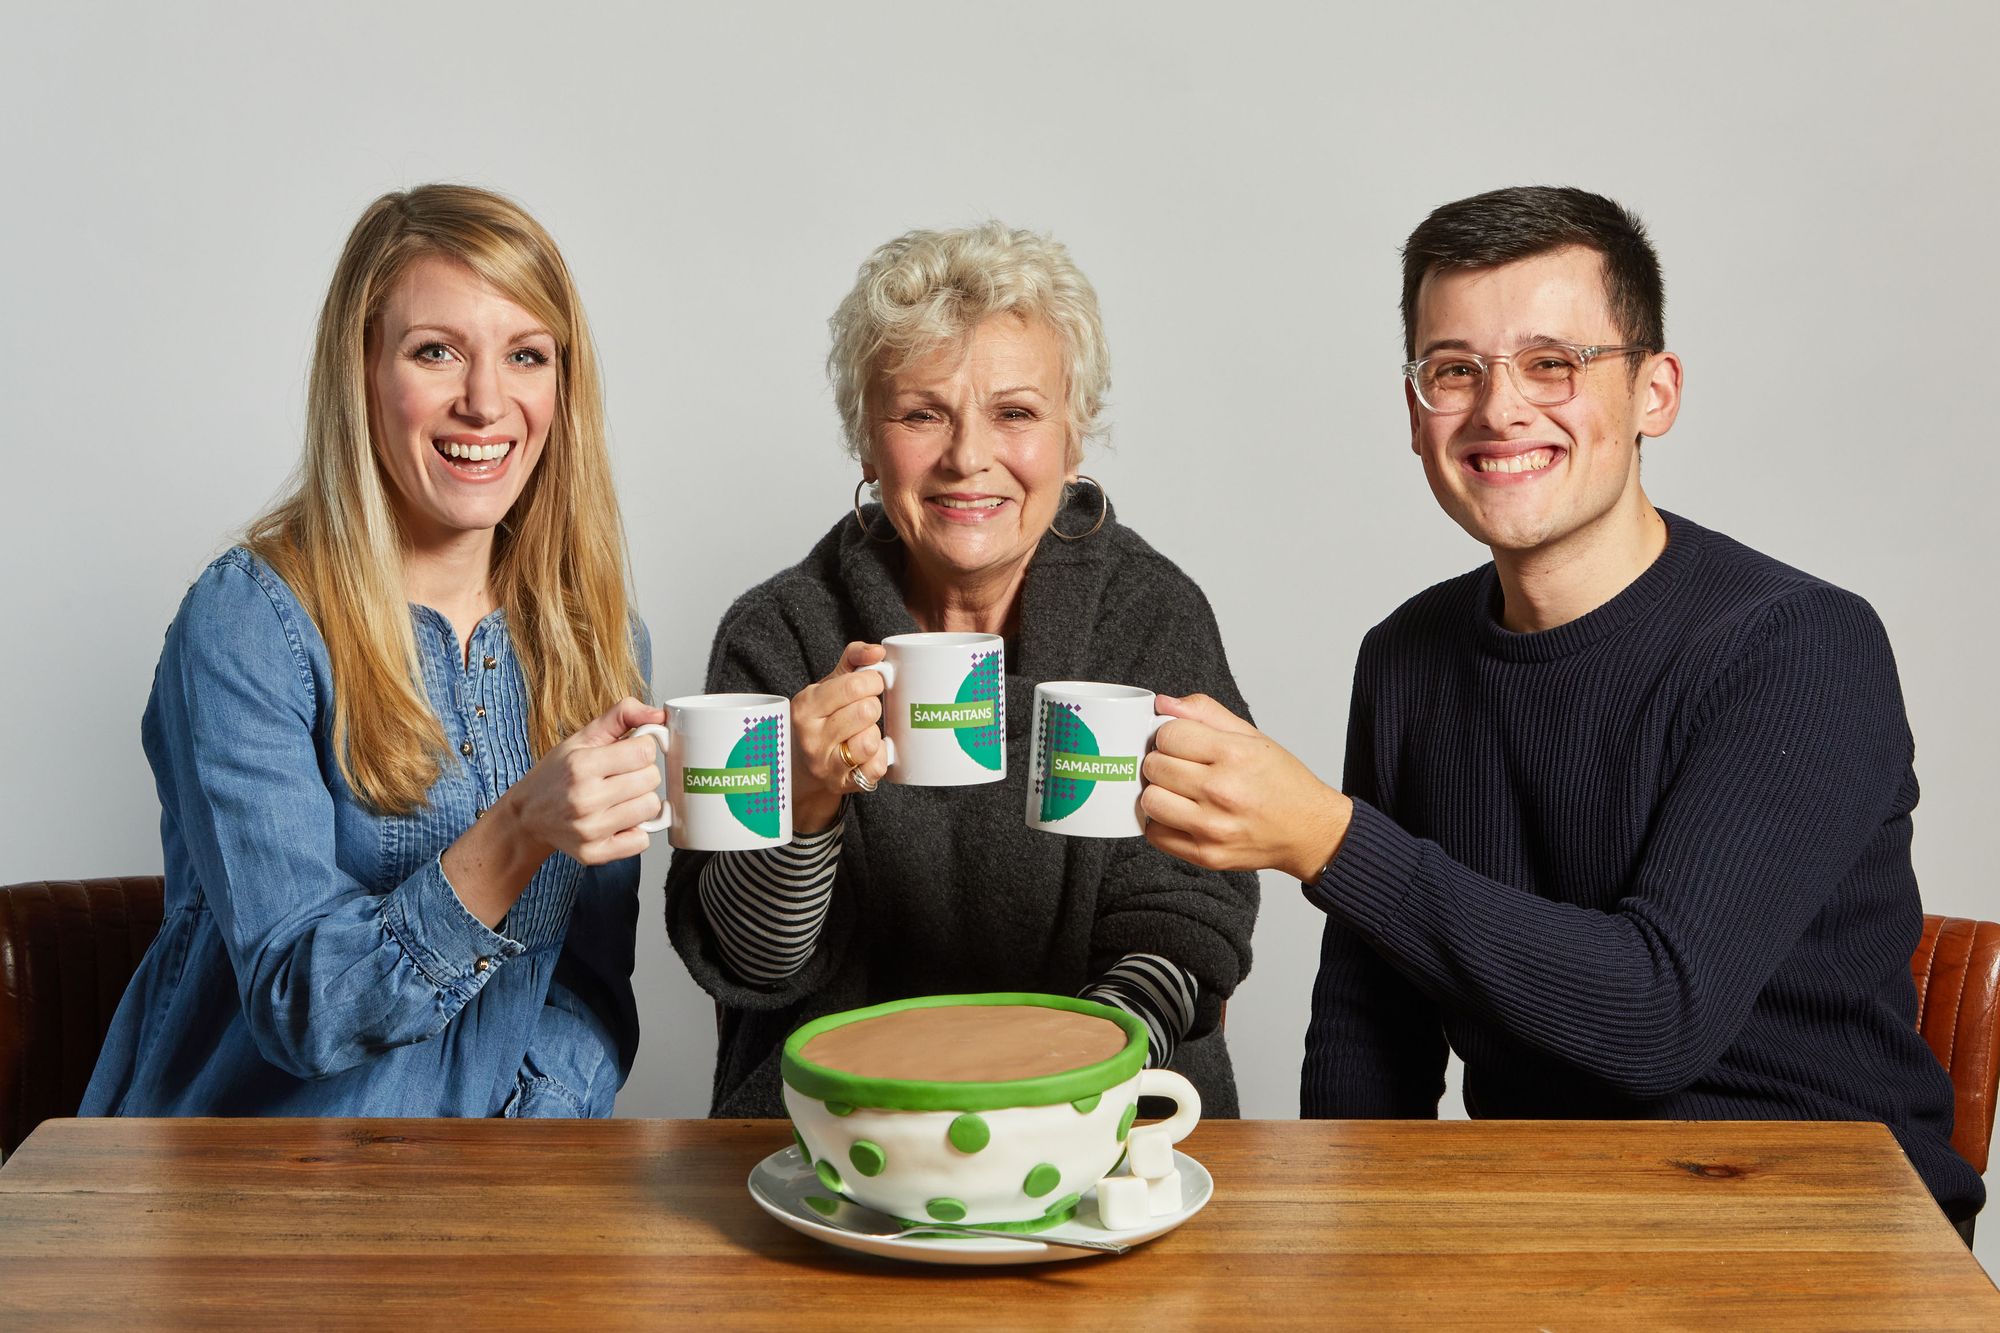 Dame Julie, Rachel and Michael share a cup of tea and pose with a teacup-shaped cake